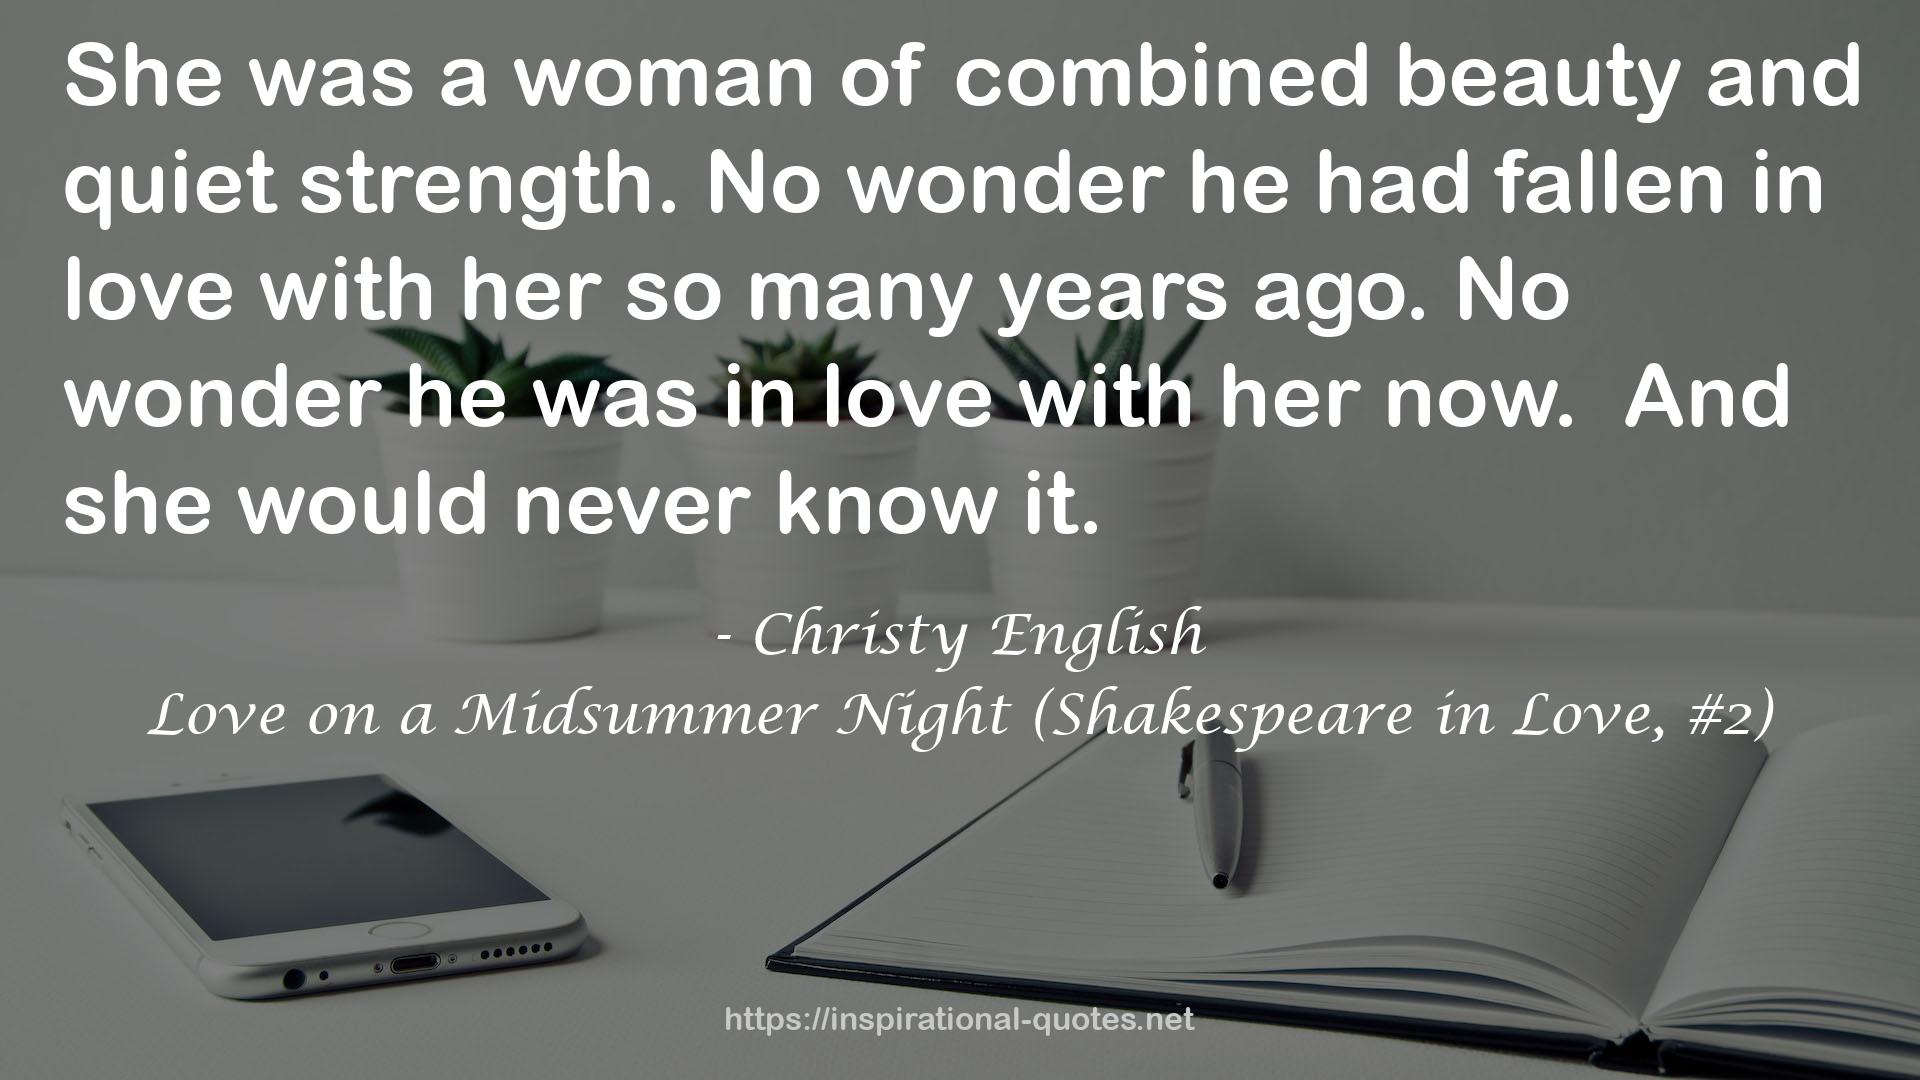 Love on a Midsummer Night (Shakespeare in Love, #2) QUOTES